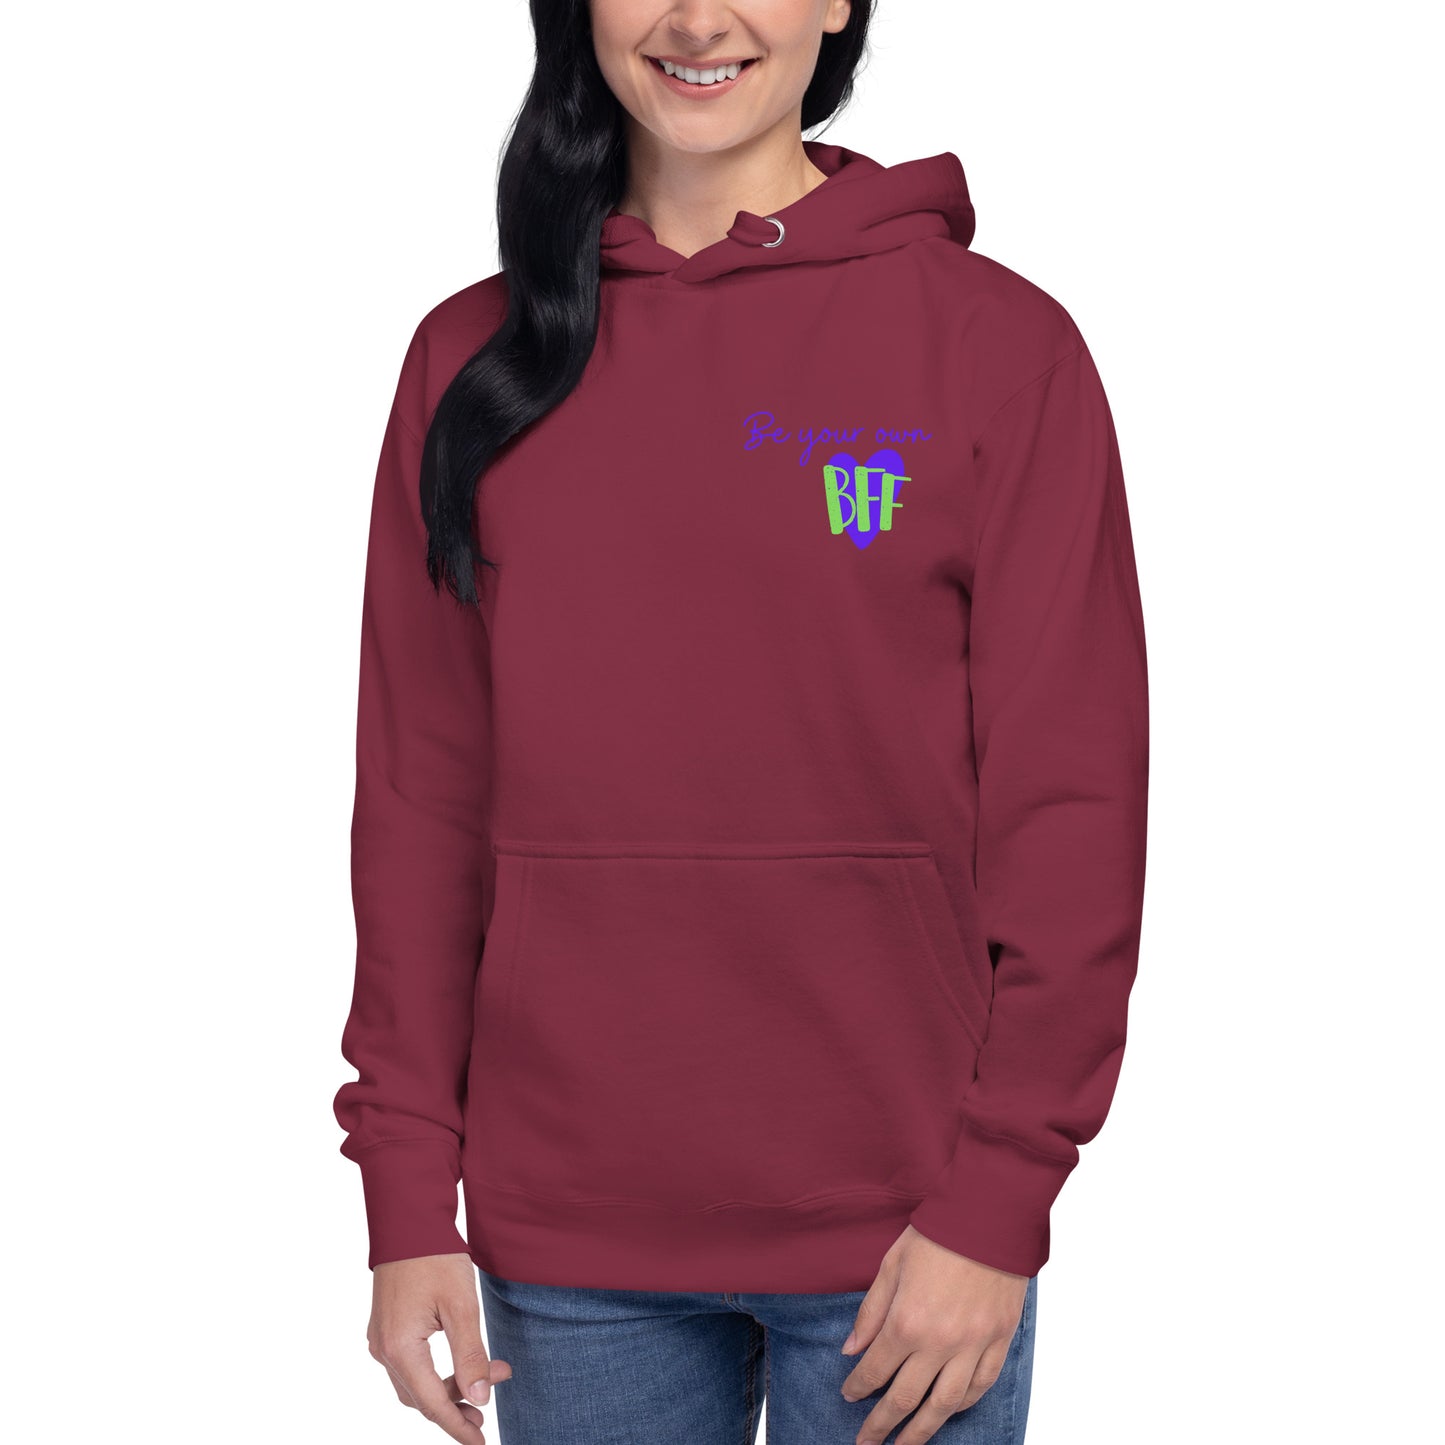 Unisex Hoodie - Be your own BFF (front and back)